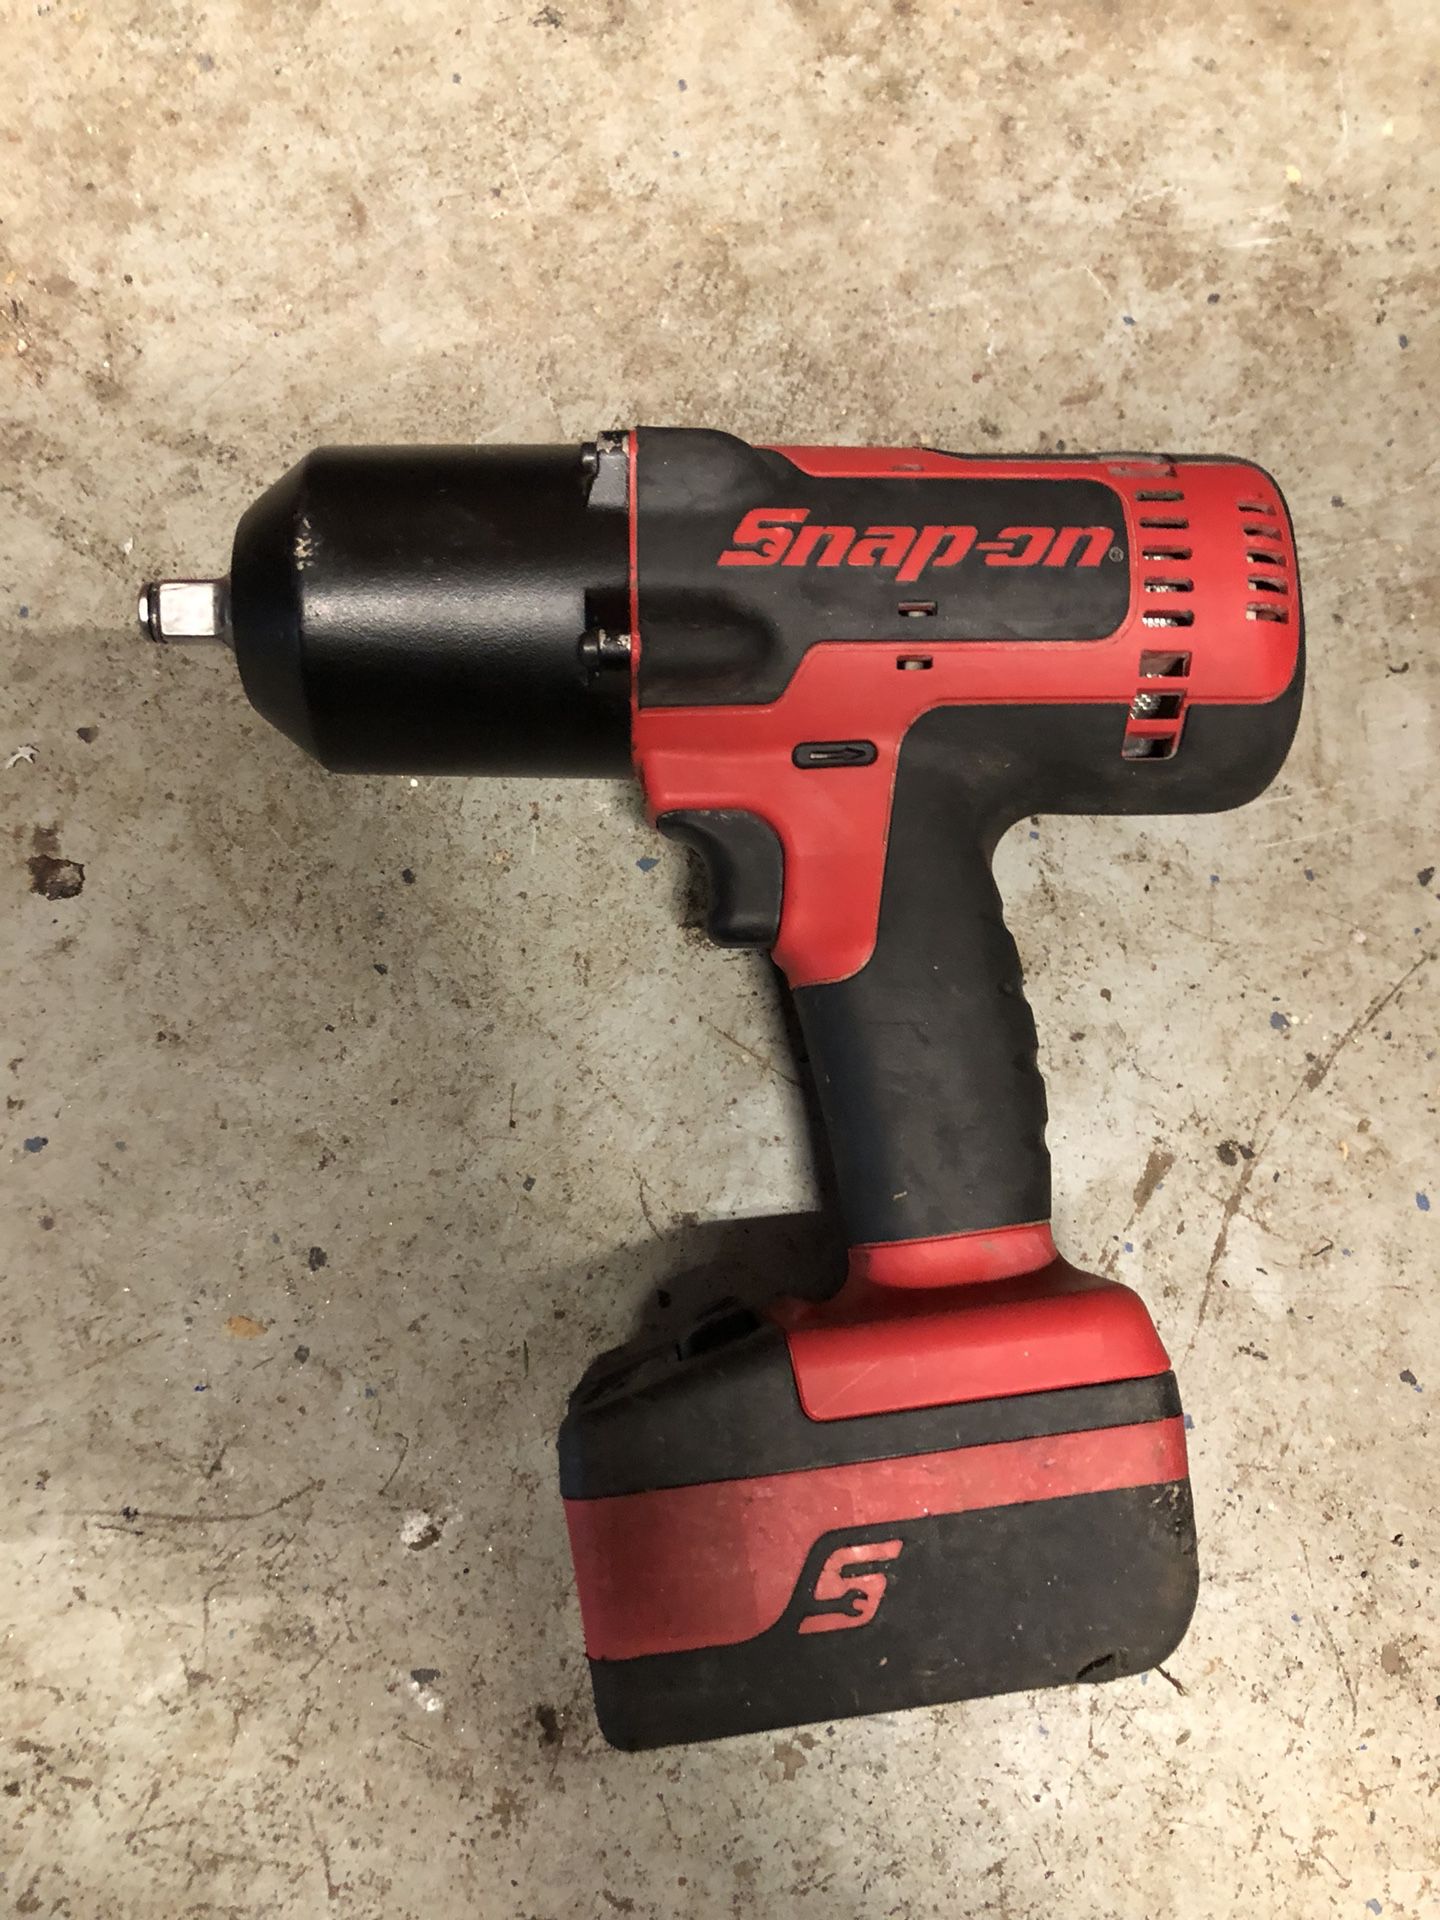 Snap on half inch impact with three batteries no charger